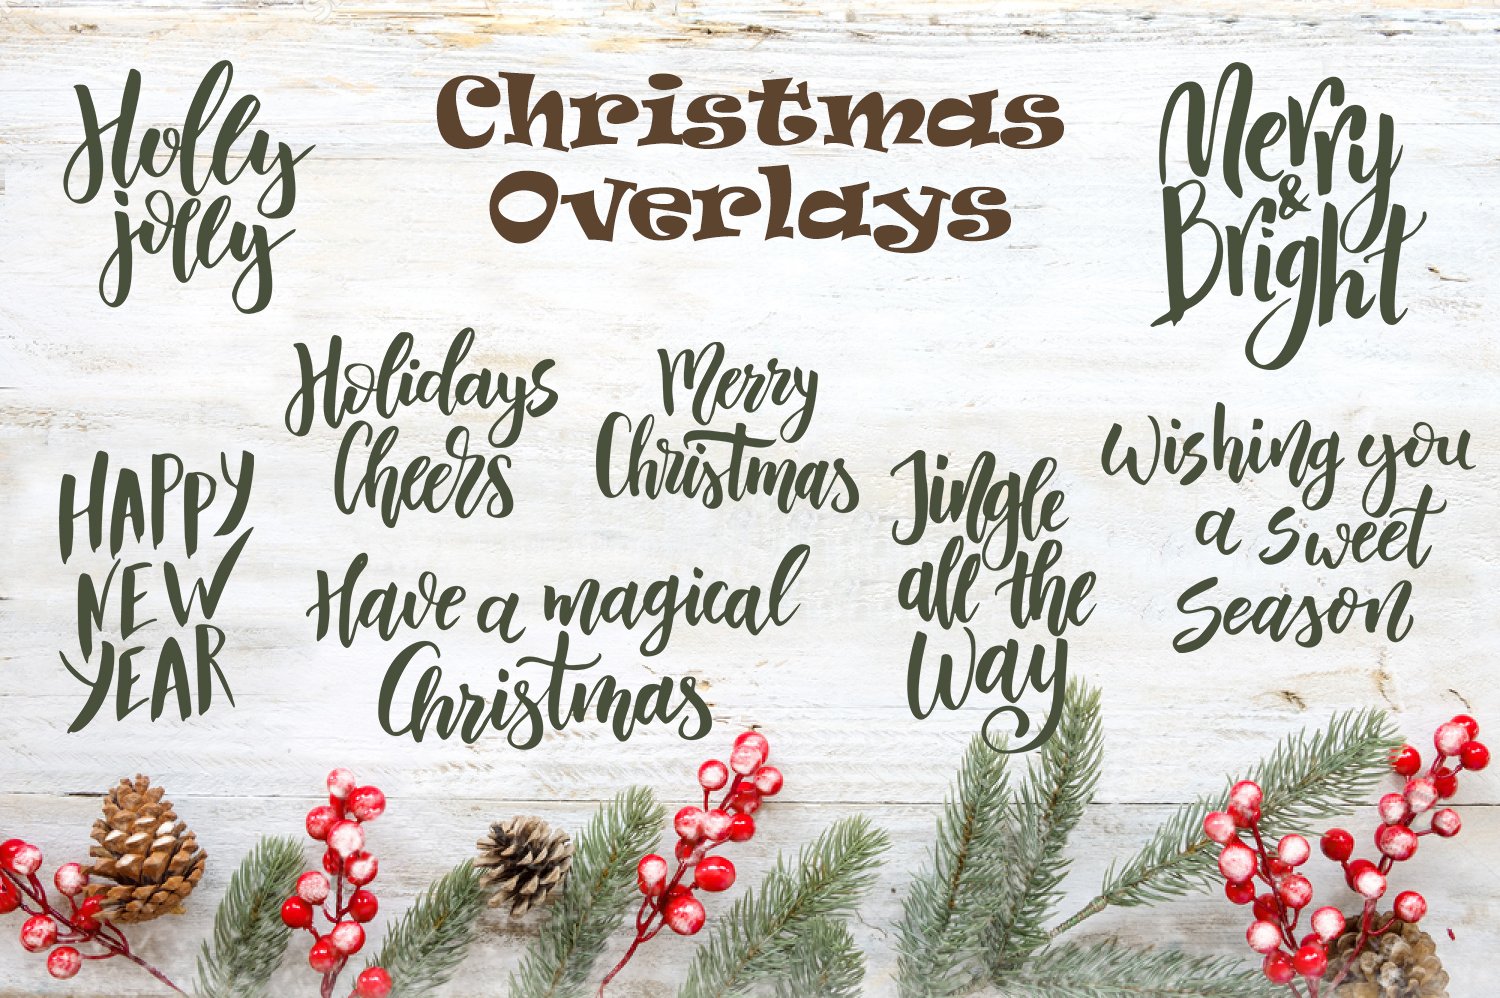 Diverse of Christmas overlays.